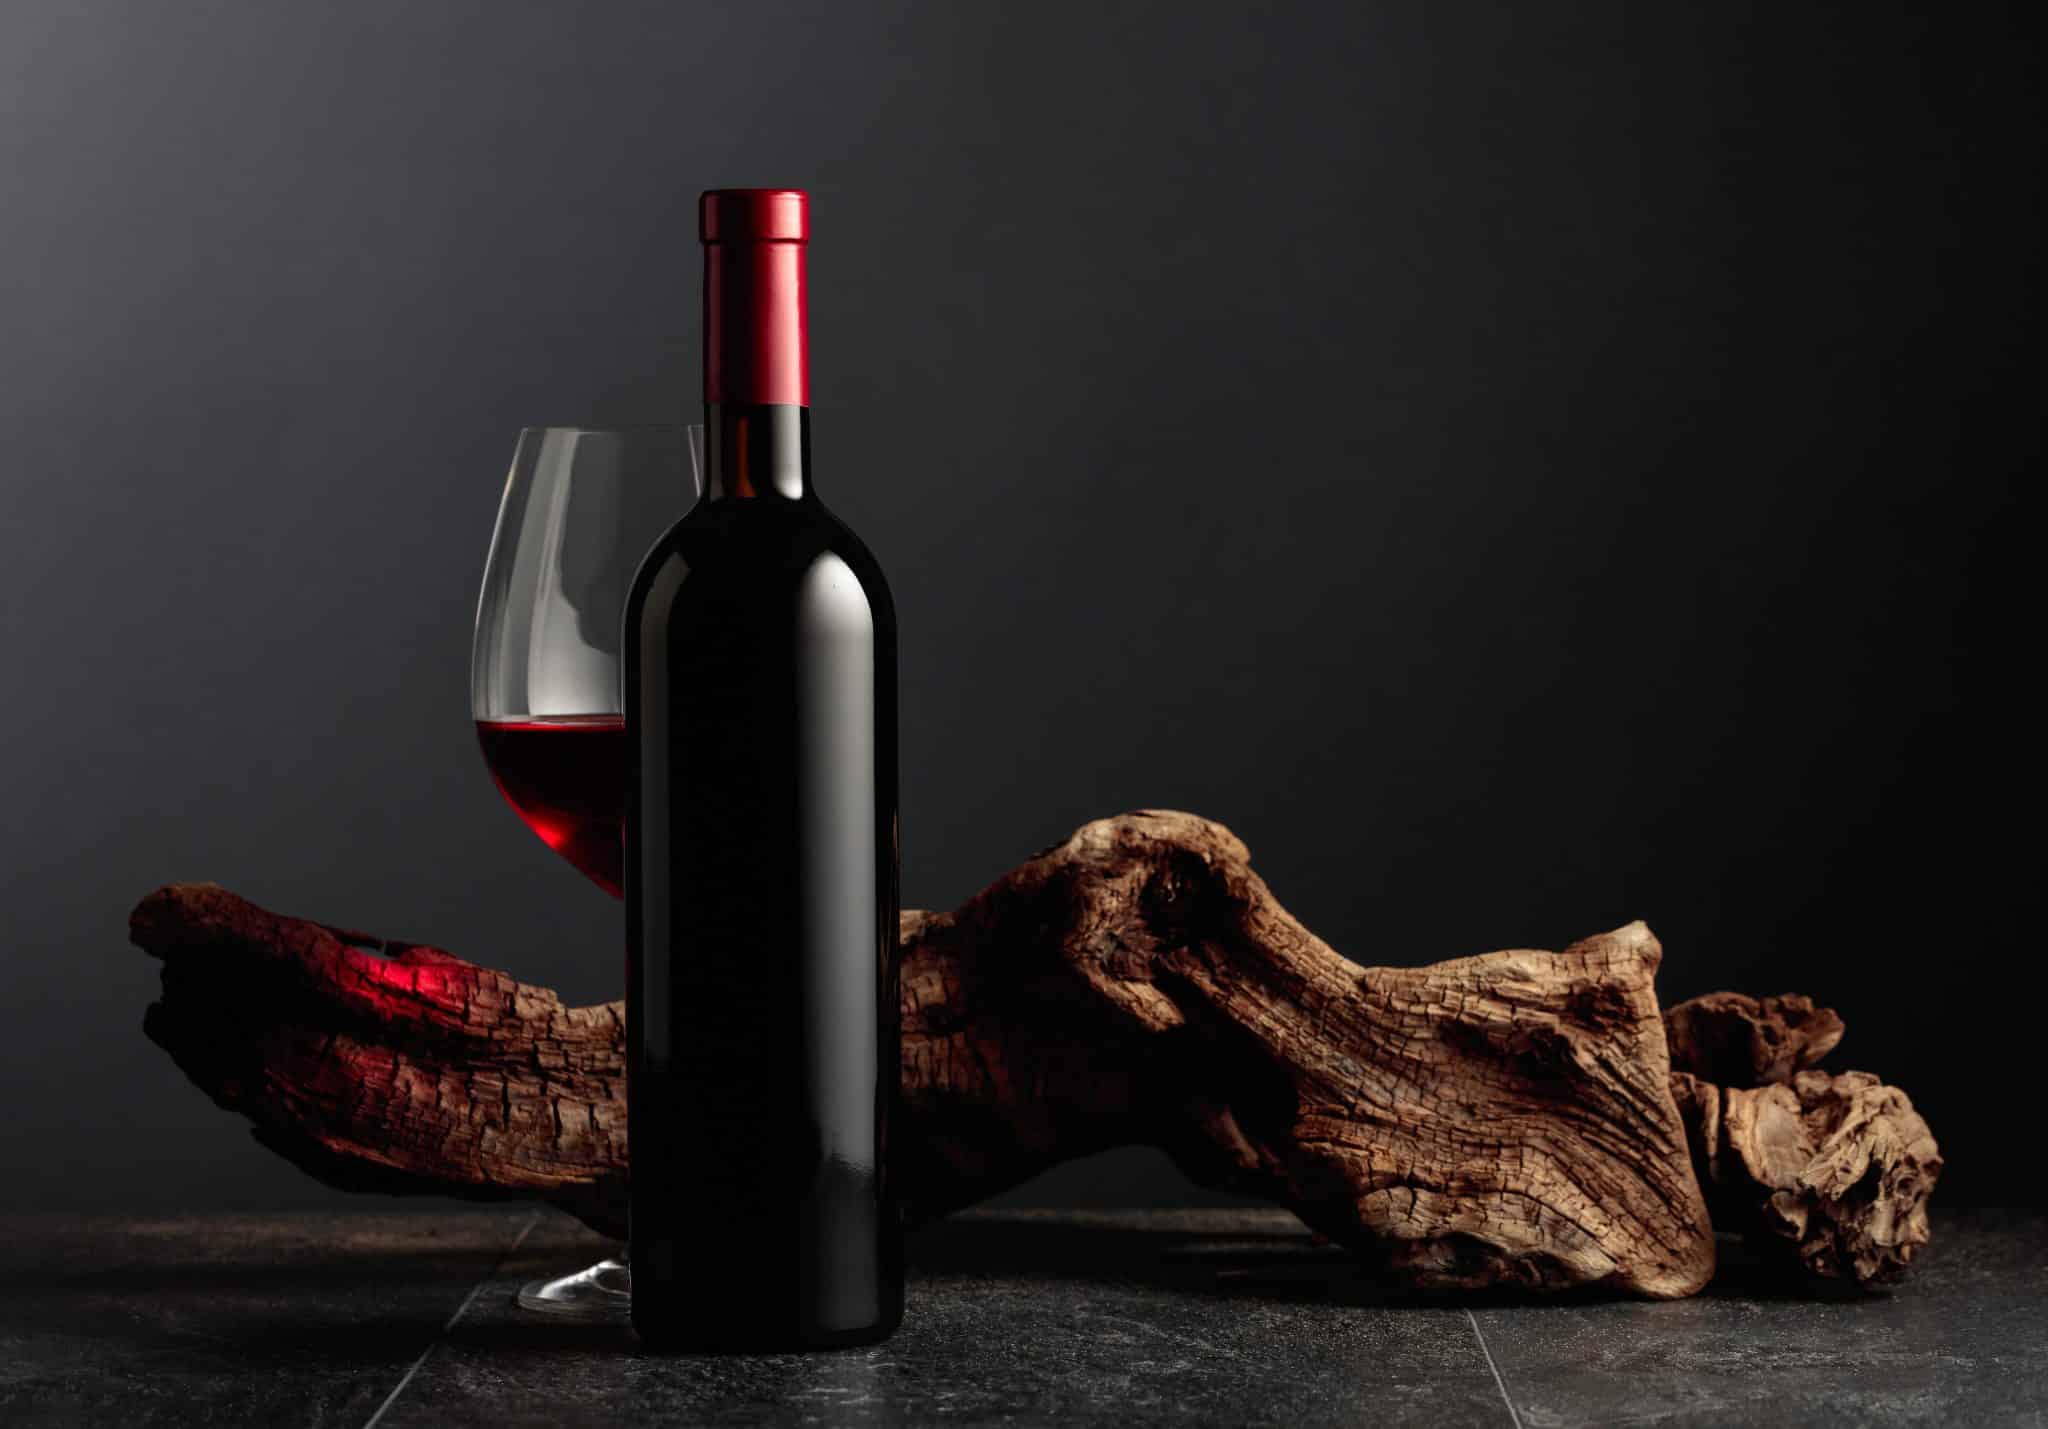 The picture shows a bottle of red wine next to a full glass, with a piece of decorative wood in the background, all set against a dark backdrop.